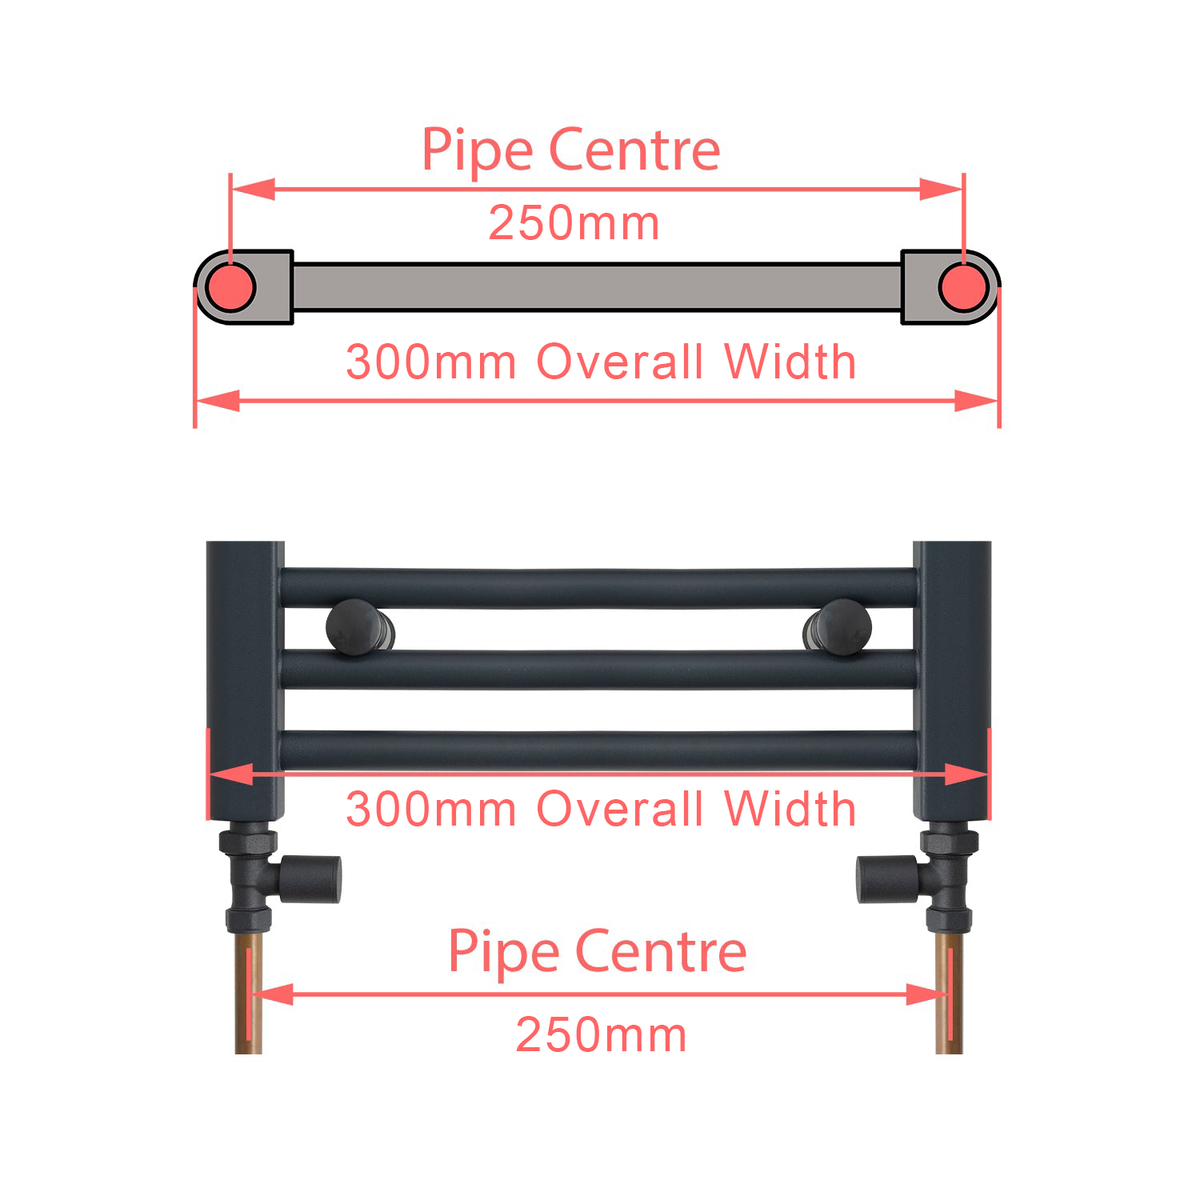 300 mm Wide Towel Rail Pipe Centre / Axis 250mm Diagram